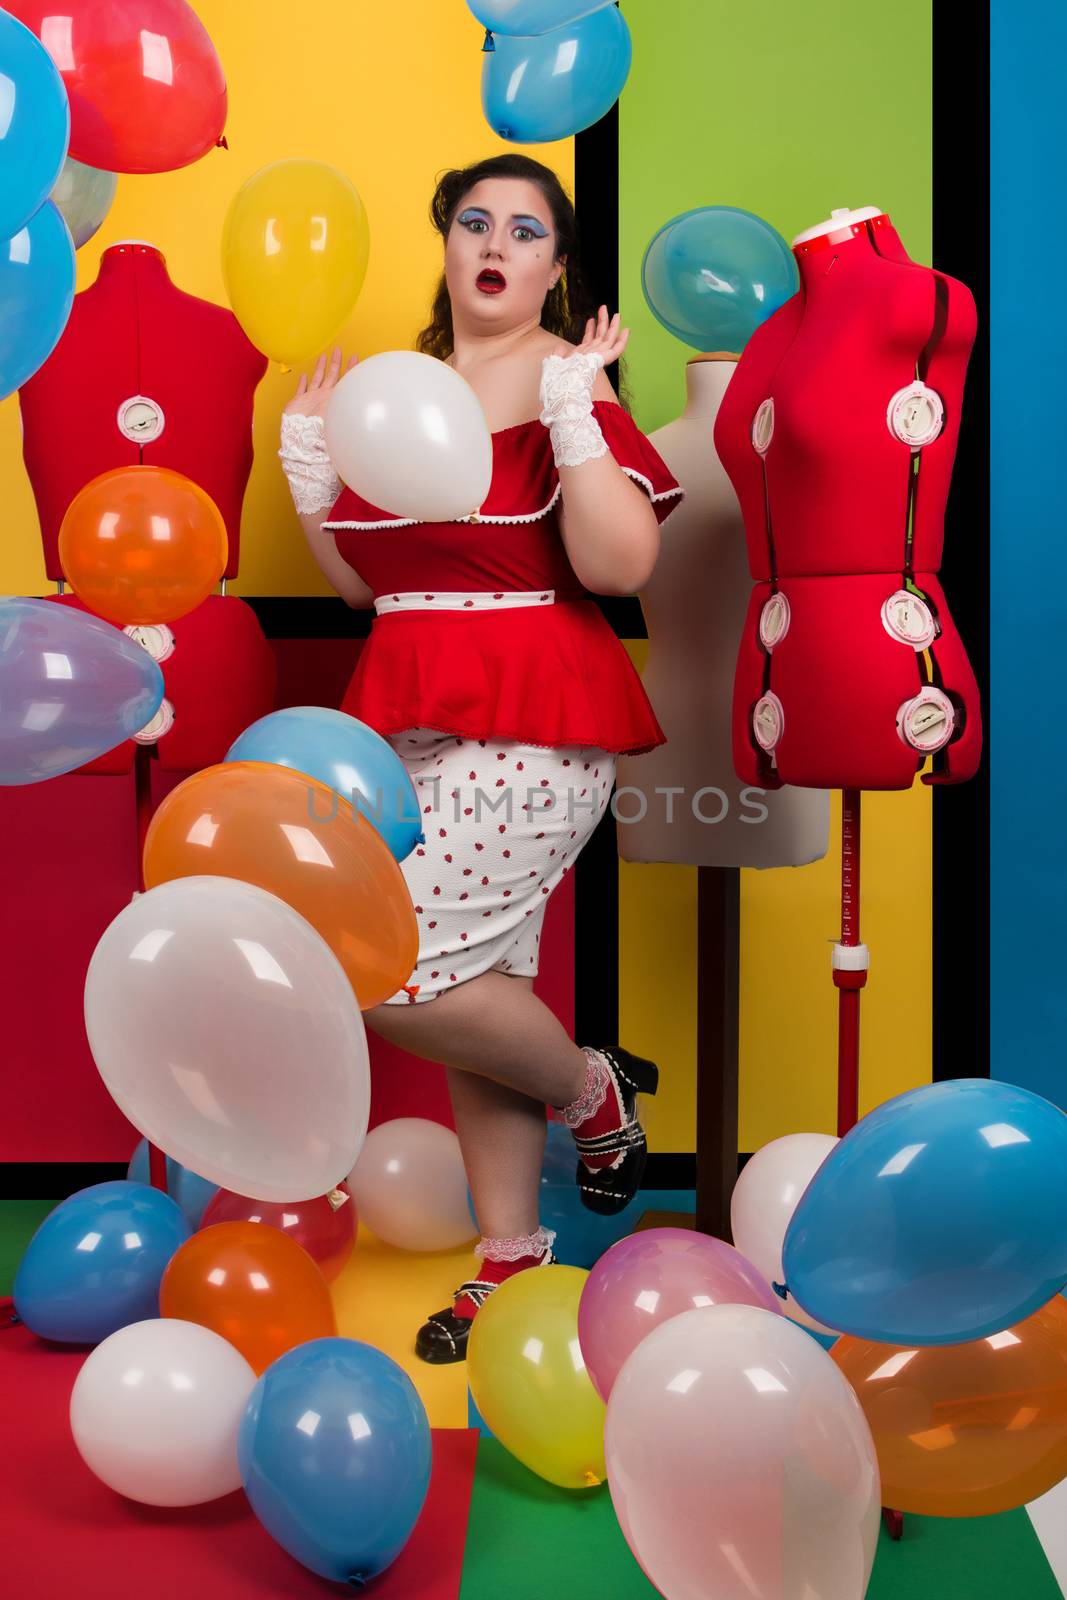 View of pinup vintage girl on a  colorful room filled with balloons.